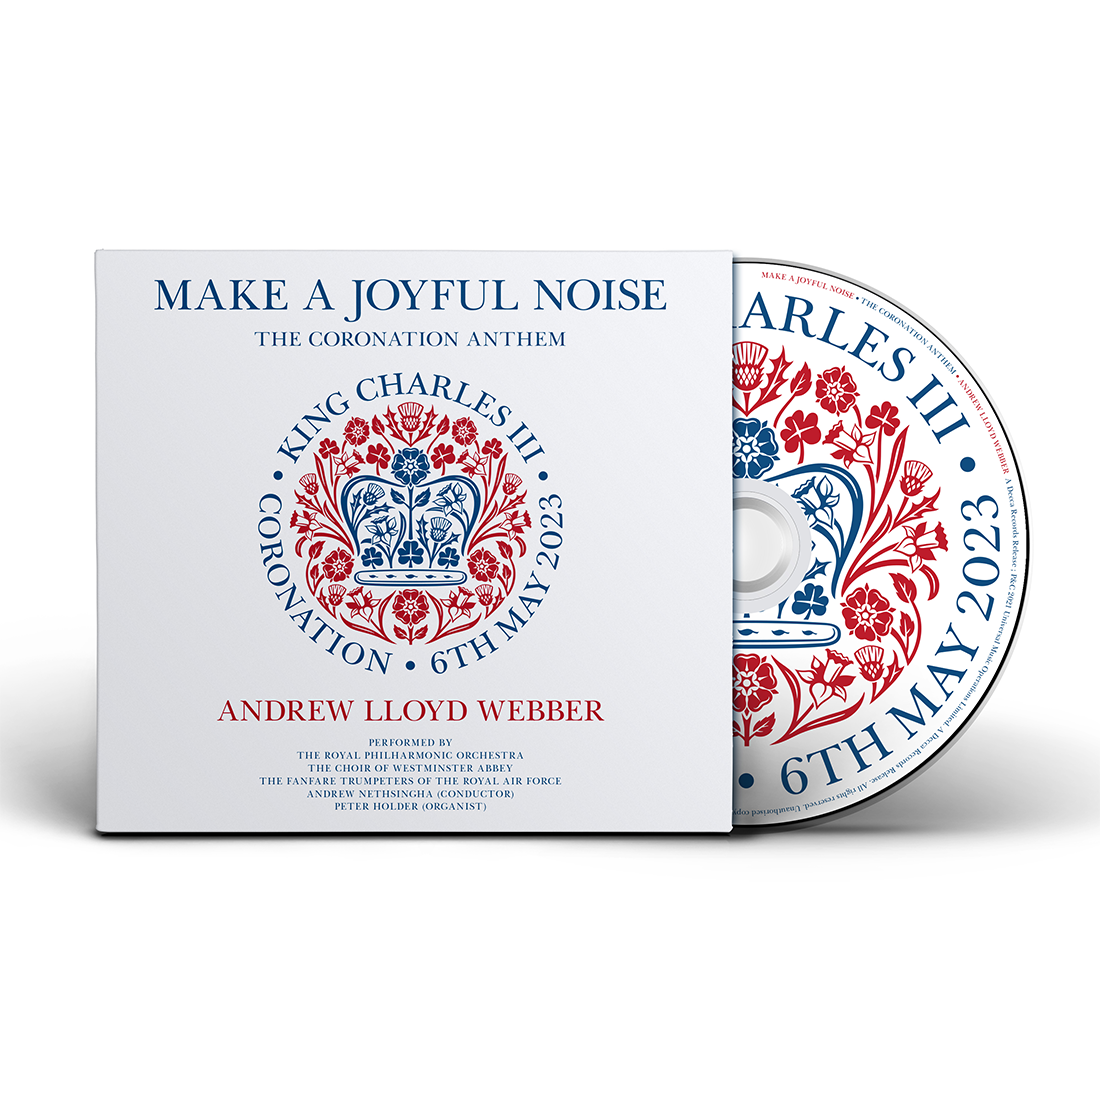 Andrew Lloyd Webber, Royal Philharmonic Orchestra, The Choir Of Westminster Abbey, Fanfare Trumpeters Of The Royal Air Force - Make a Joyful Noise - Andrew Lloyd Webber Signed